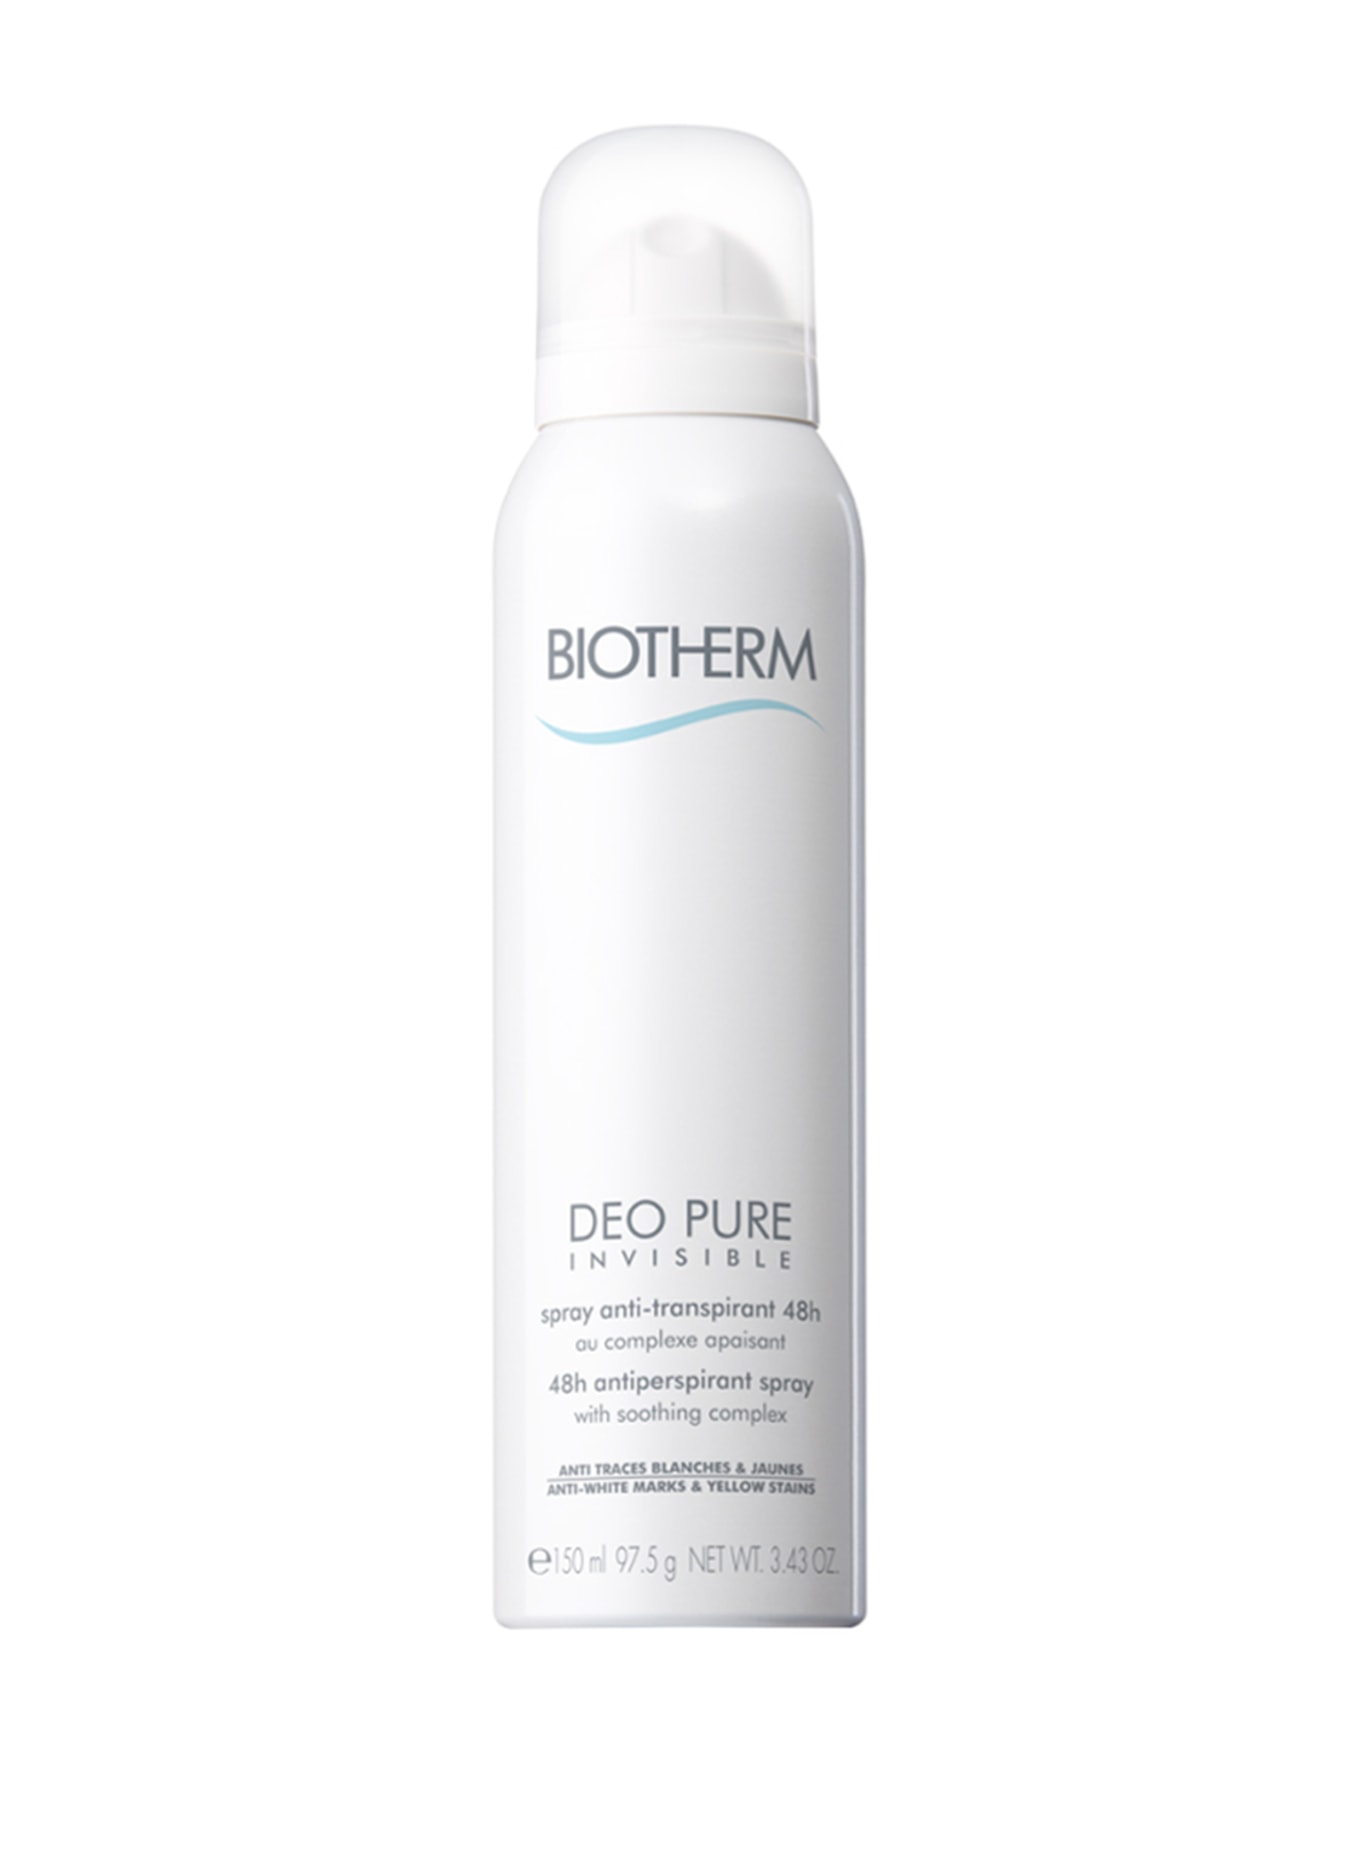 BIOTHERM DEO PURE INVISIBLE  (Obrazek 1)